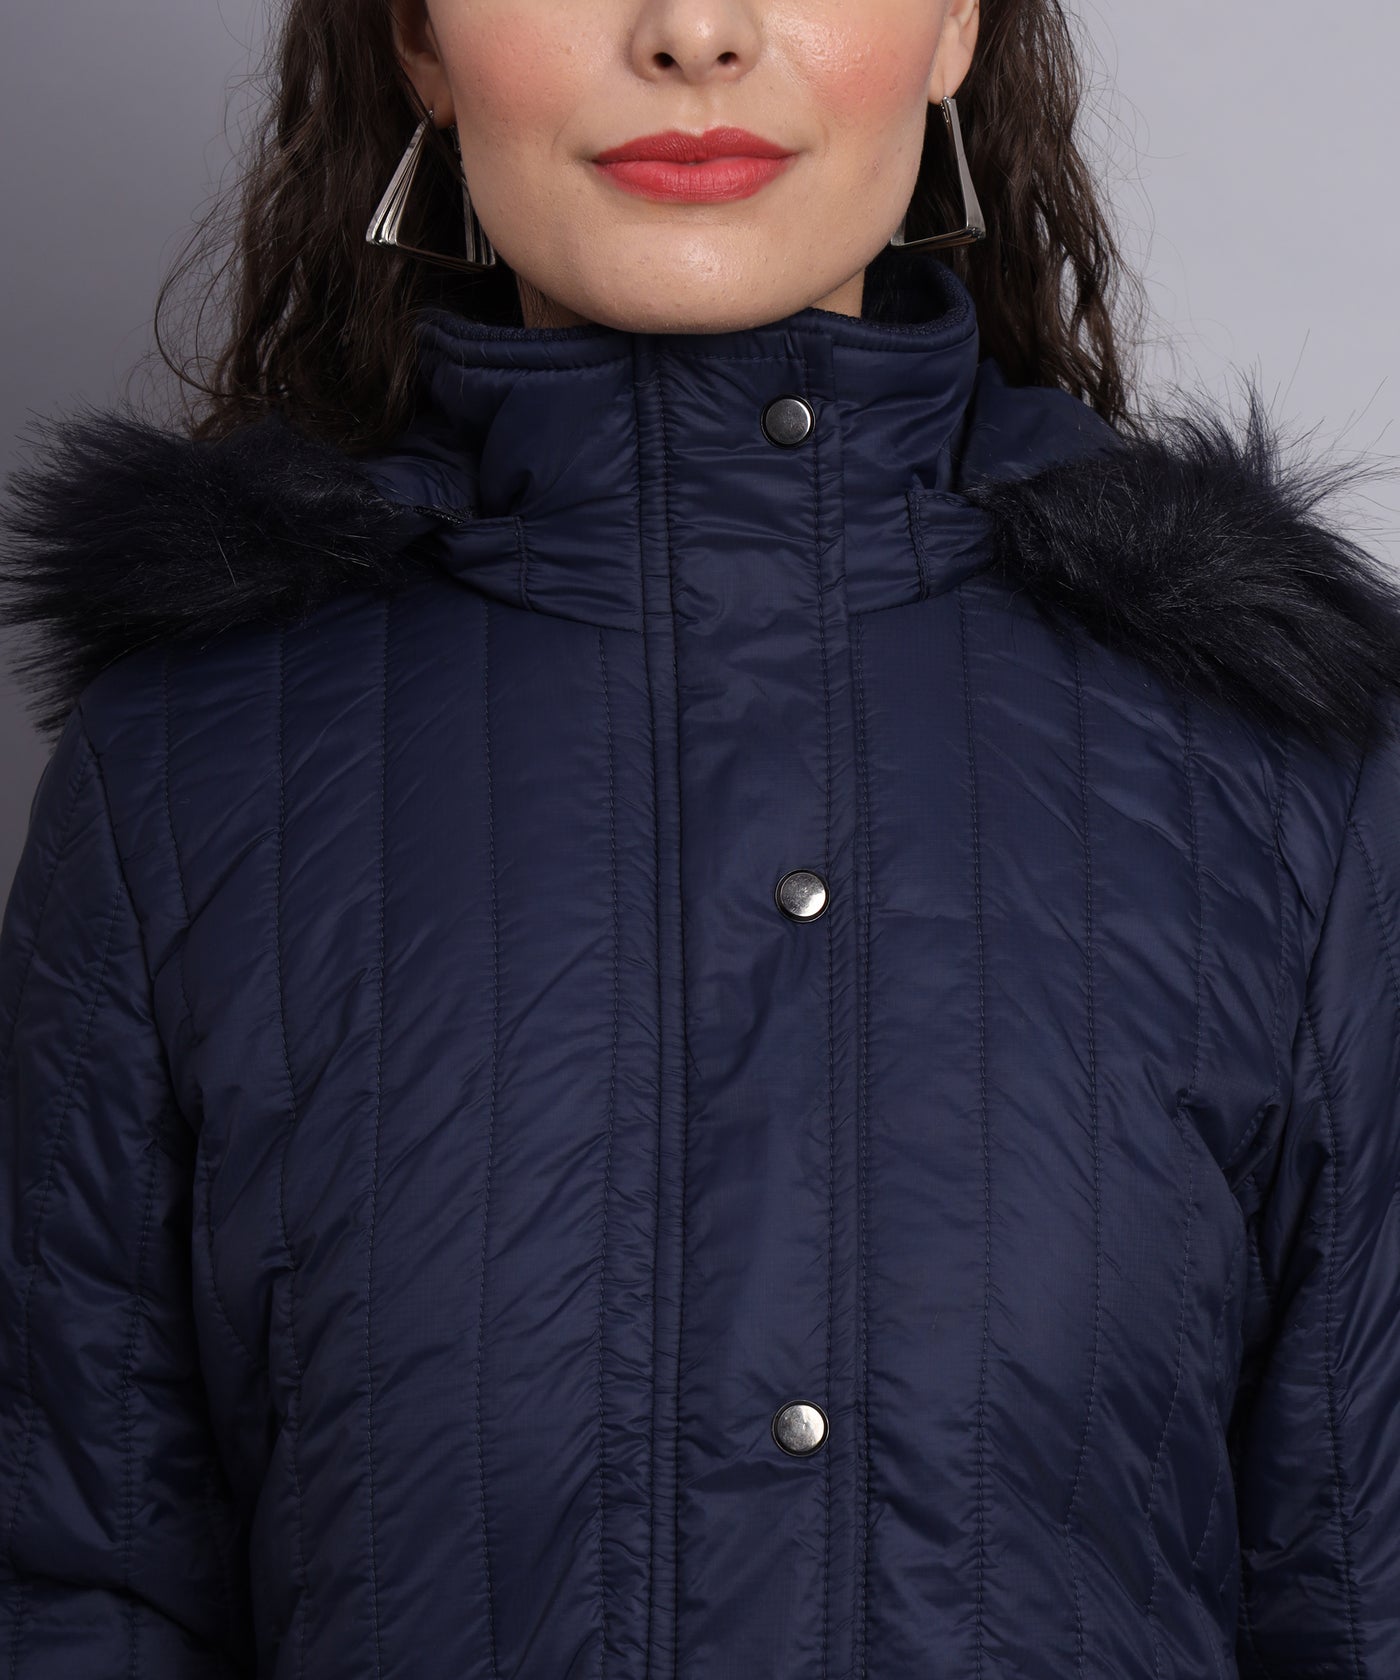 Navy diamond quilted jacket-Aw6138